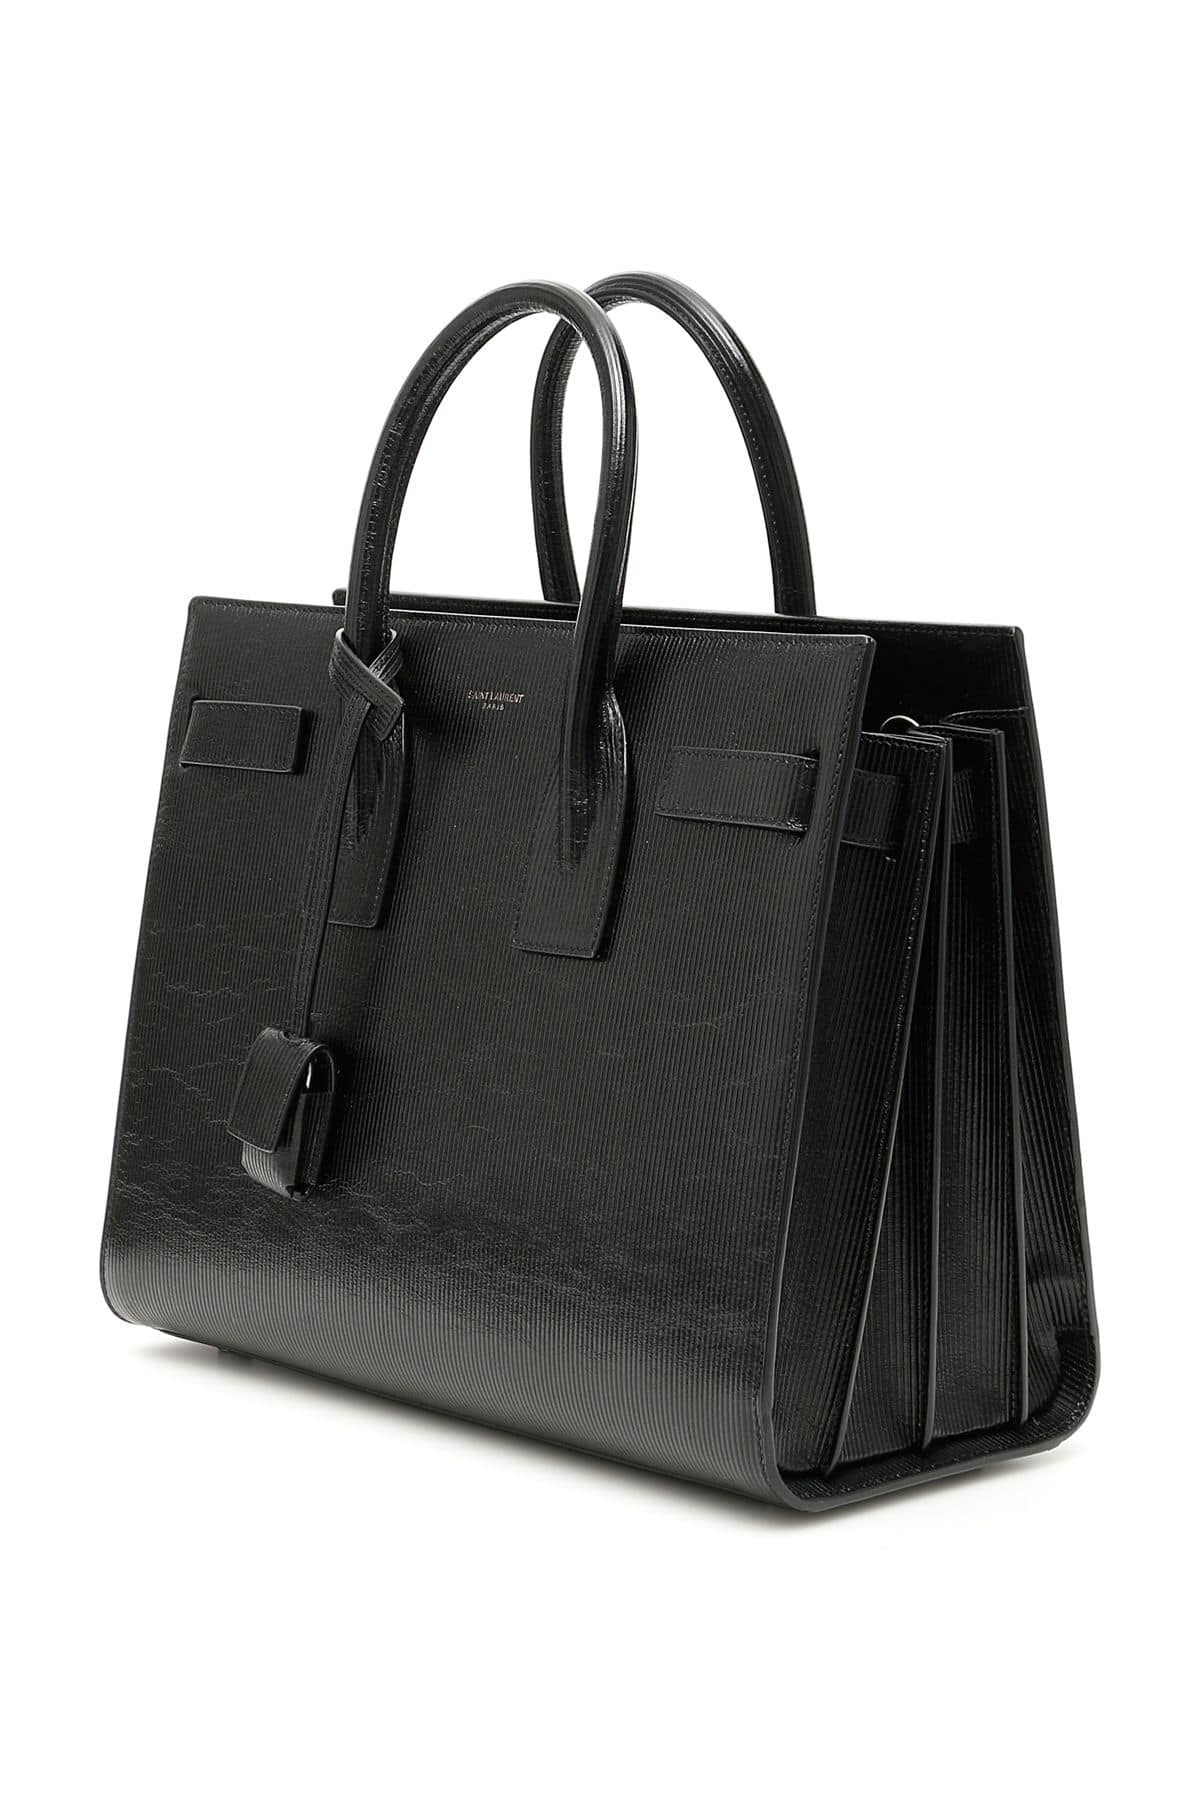 Ysl Sac De Jour Leather Bag Made In Italy With Dust Bag , Care